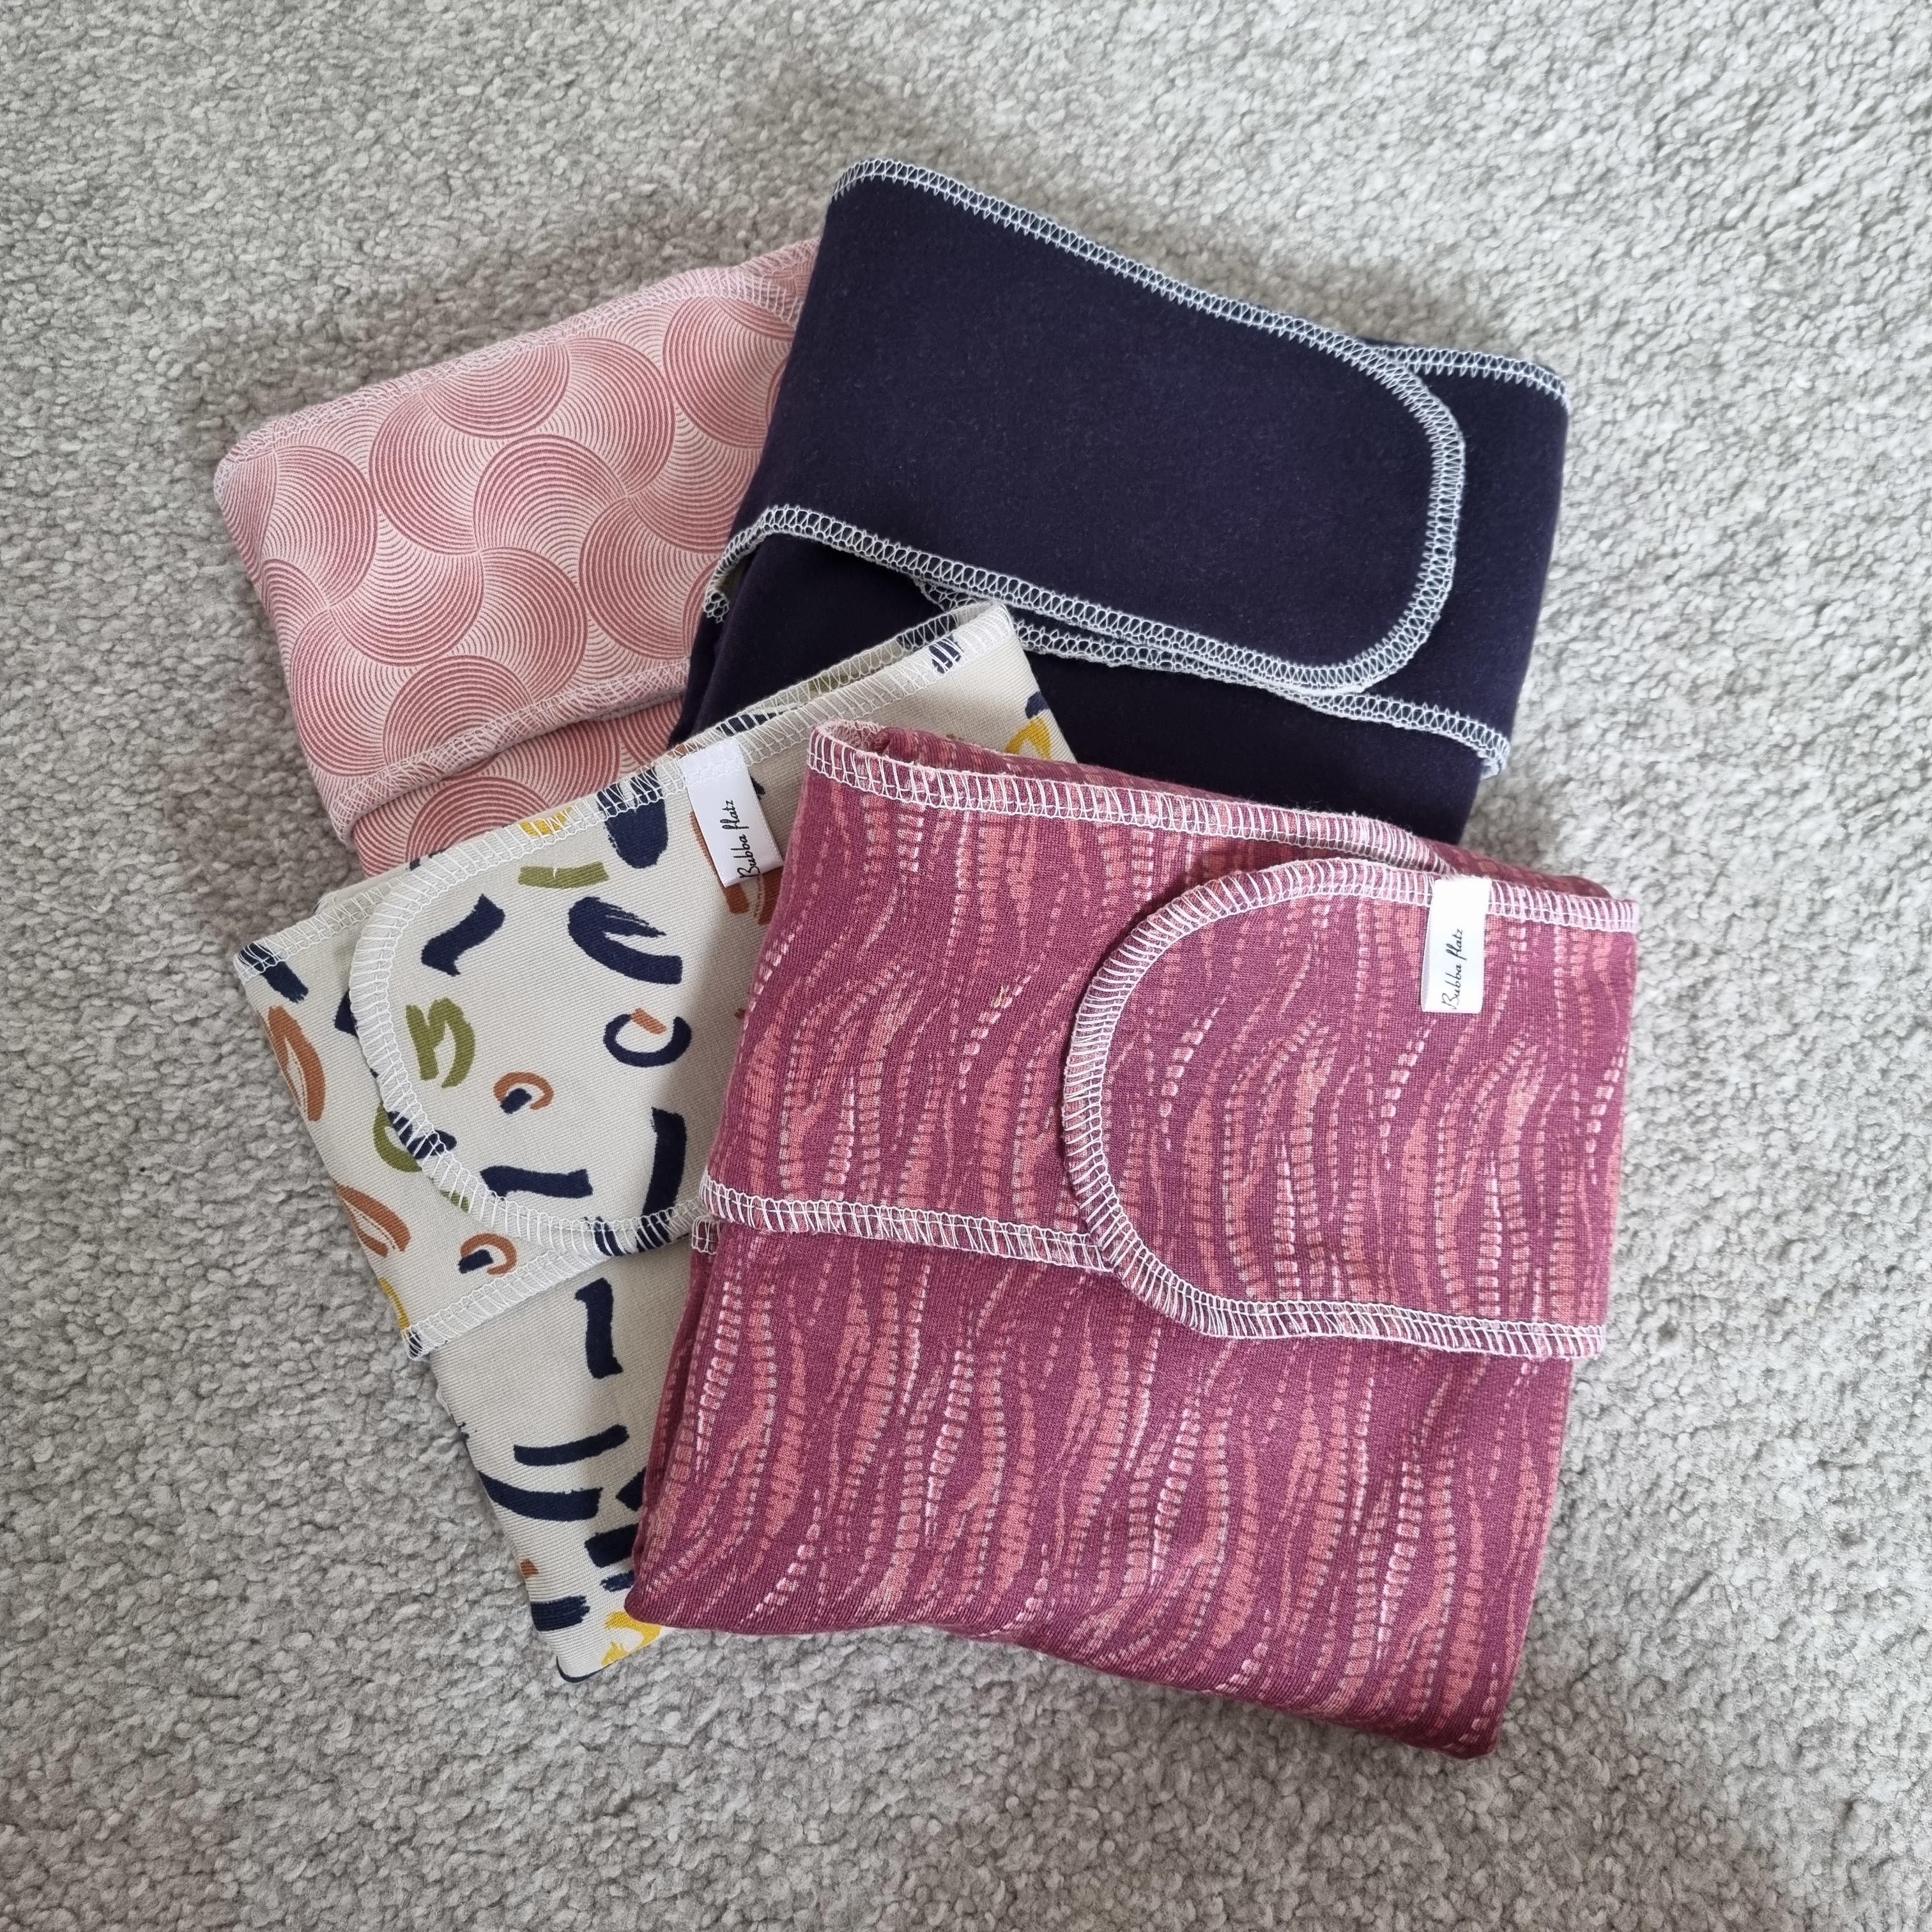 4 folded folded preflat cloth nappies in differing colours and patterns